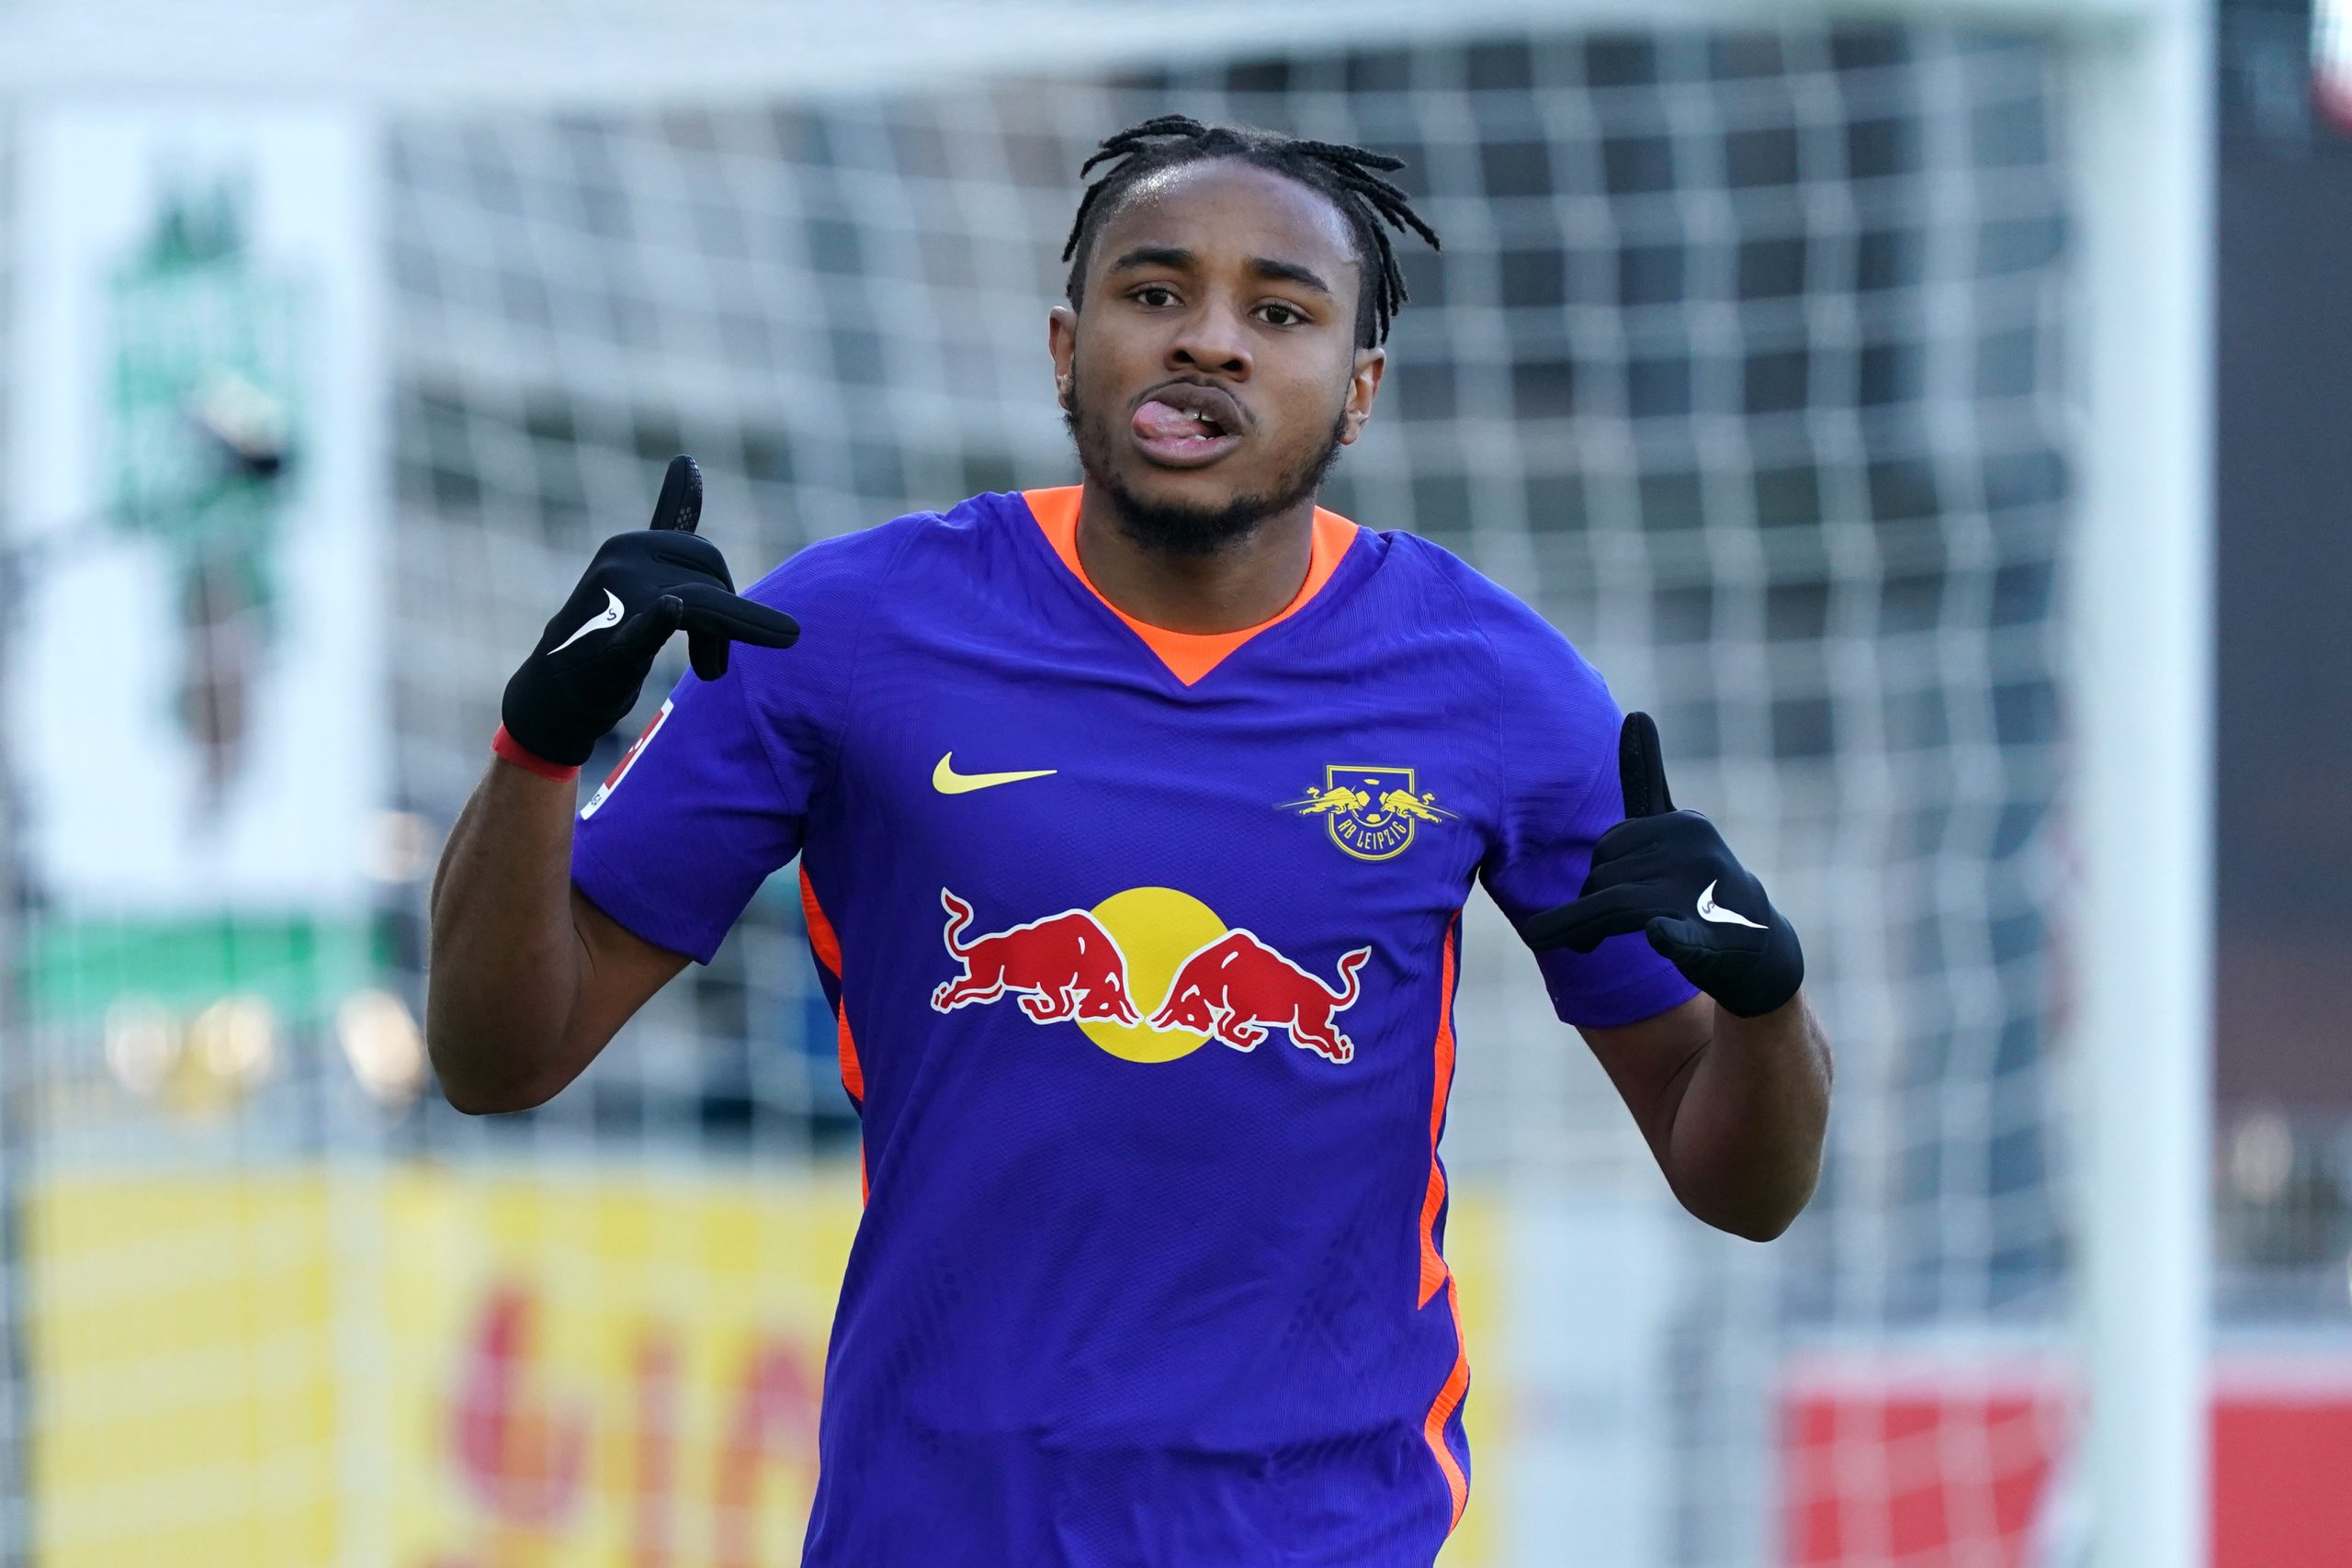 Chelsea want to sign RB Leipzig's Christopher Nkunku this summer.